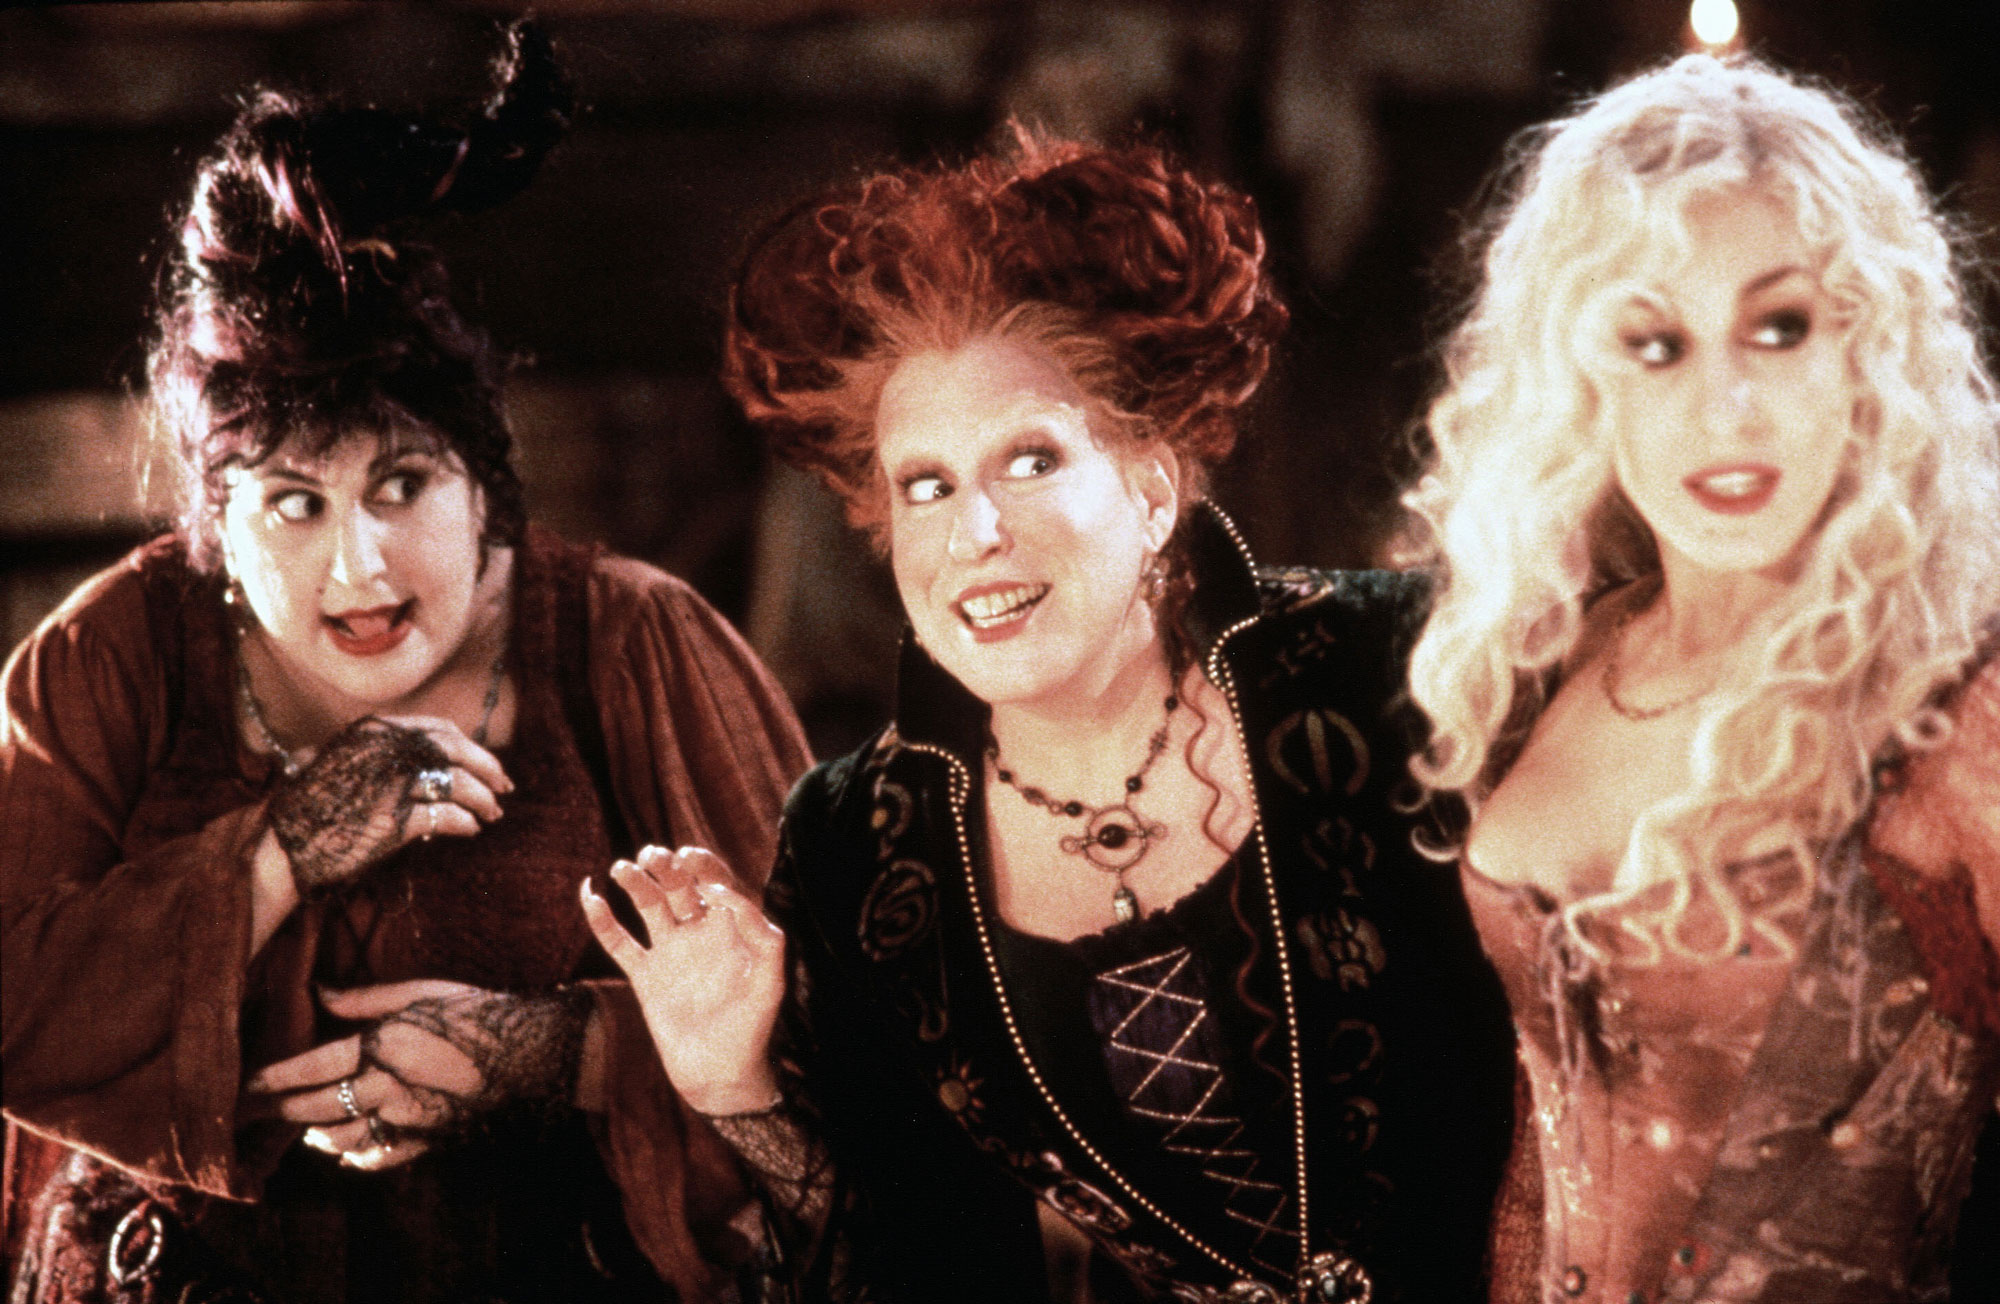 Drags Infiltrate Salem Playing The Sandersons

Kathy Najimy, Bette Midler and Sarah Jessica Parker in ‘Hocus Pocus.’ Disney/Kobal/Shutterstock